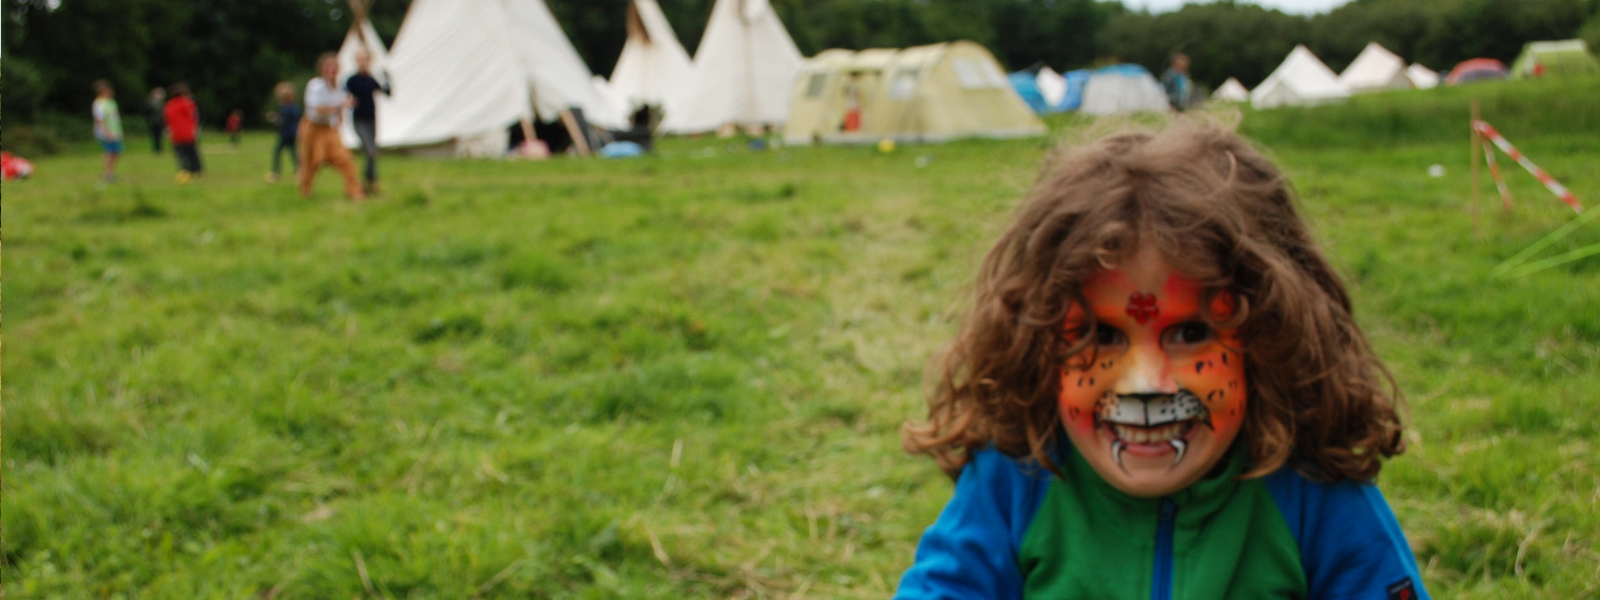 Small child with tiger make up standing in a green field in front of teepees